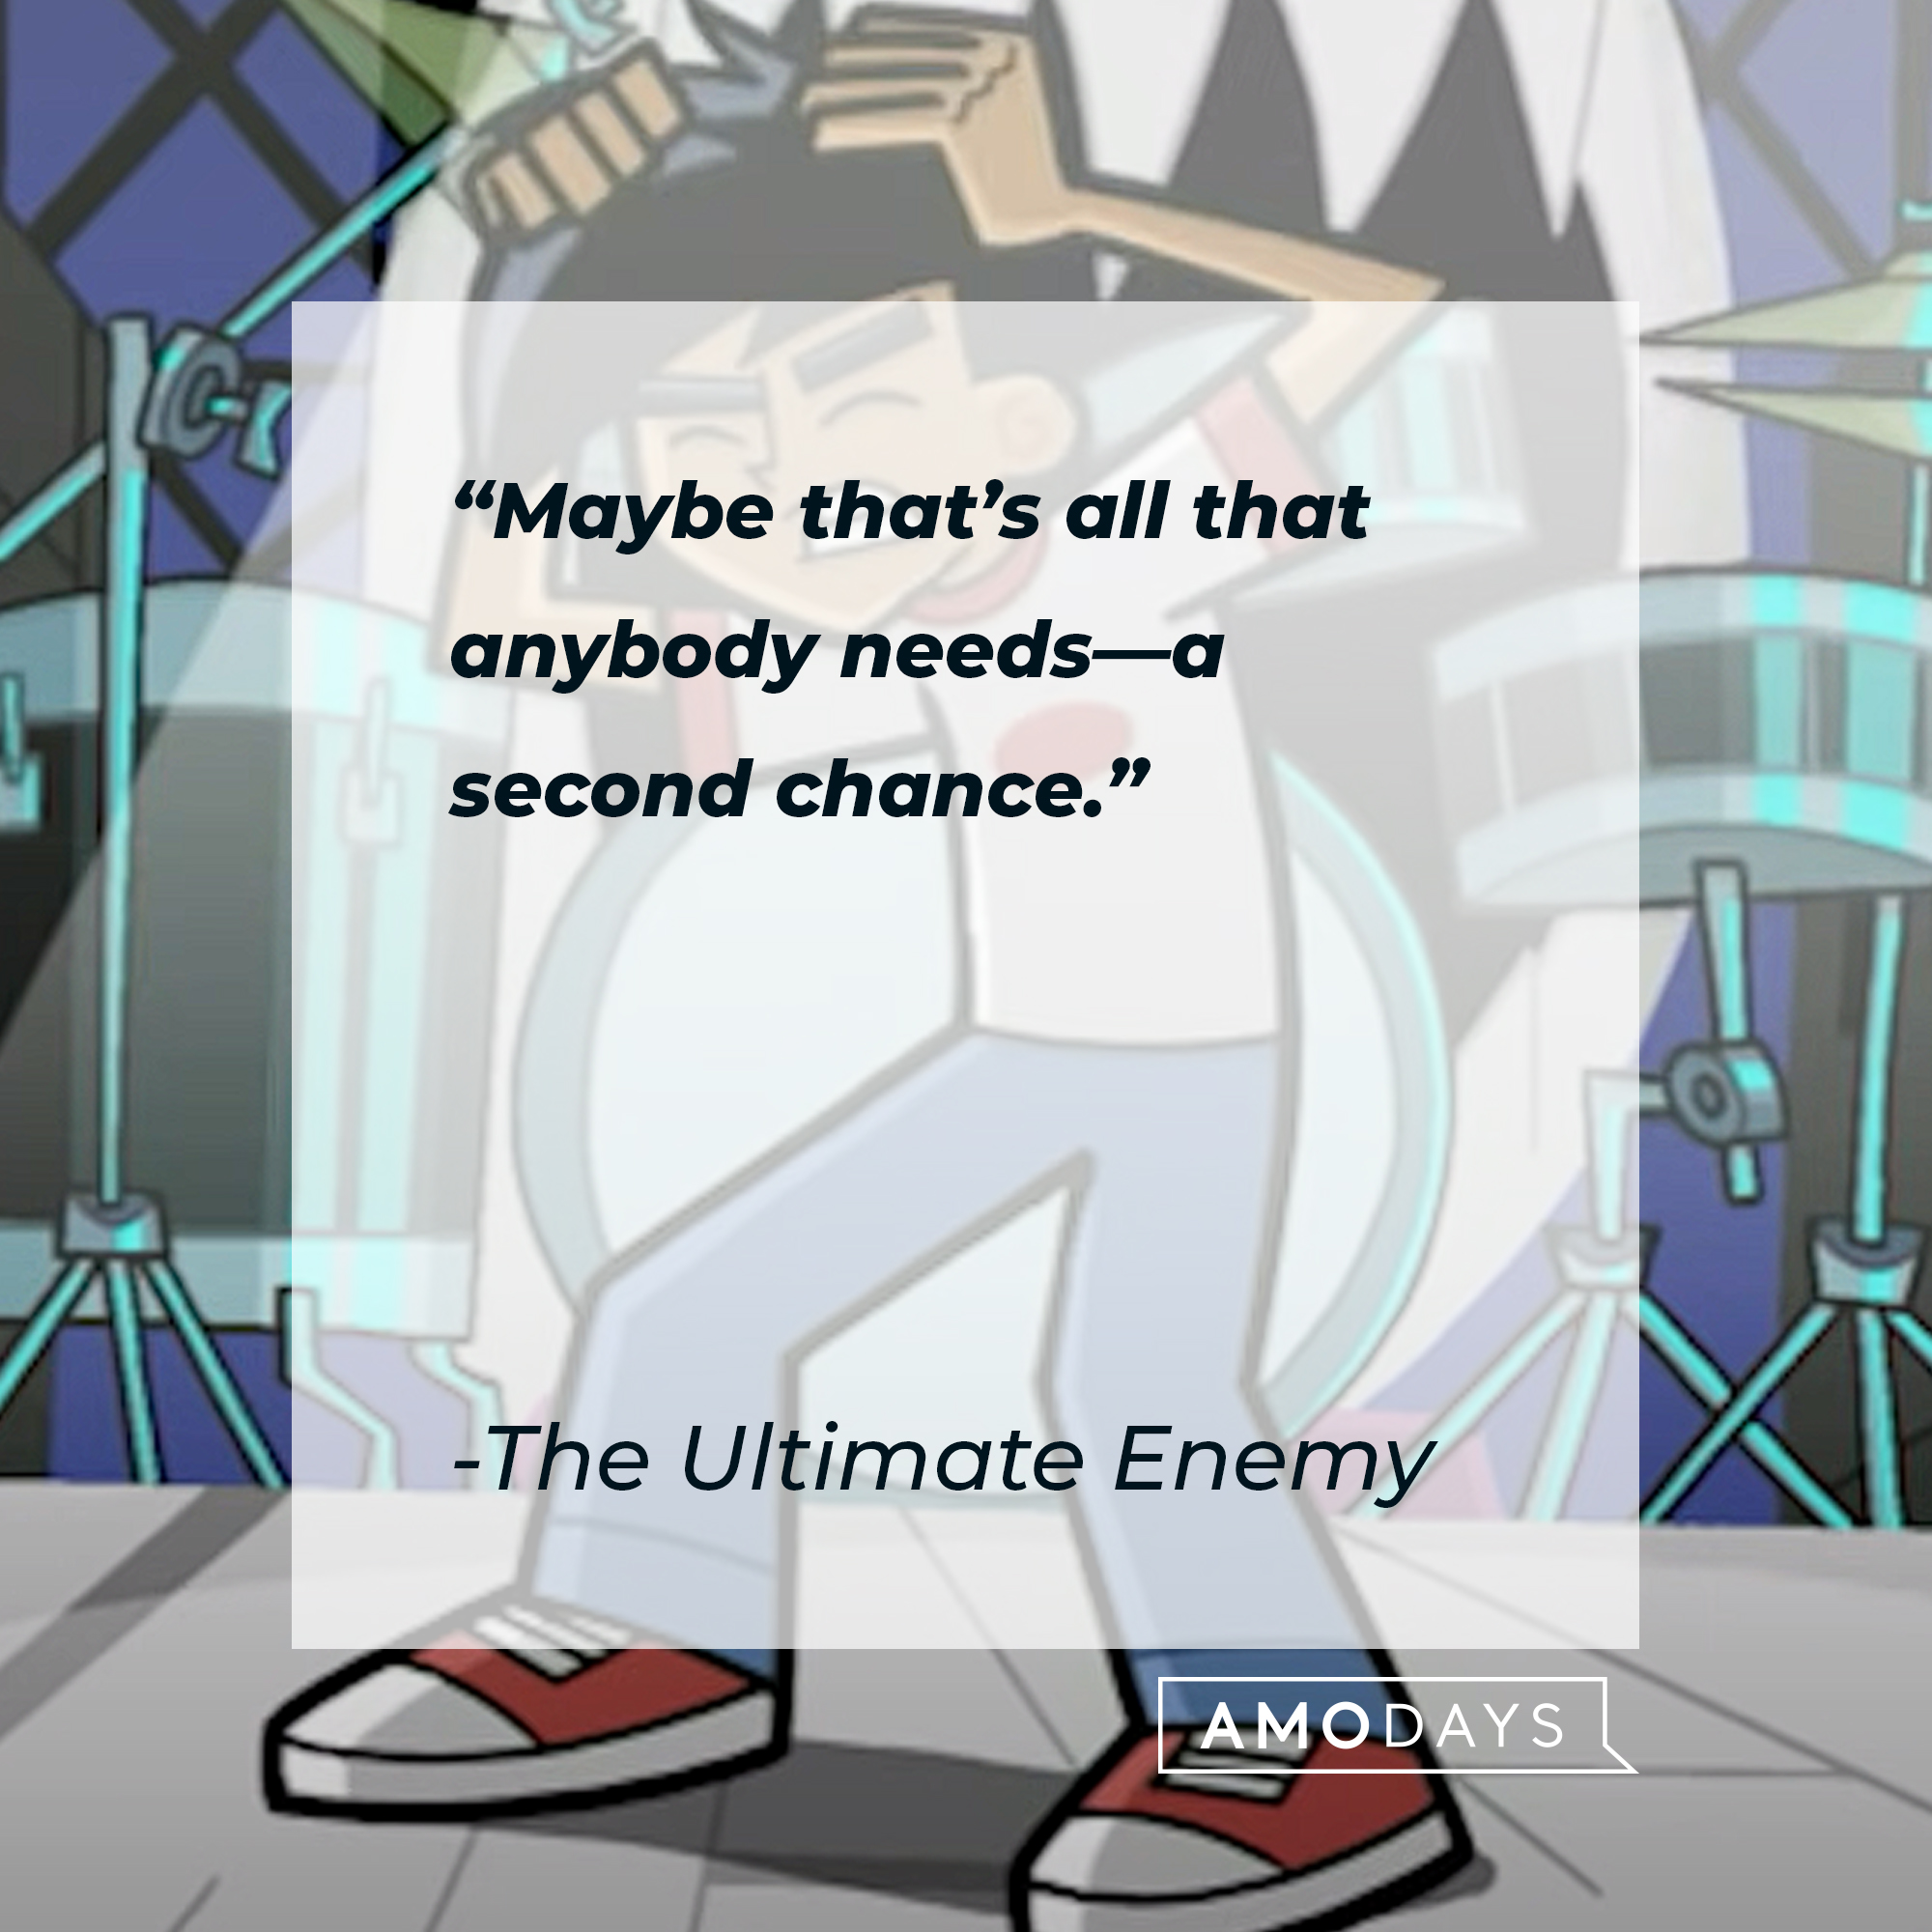 An image of Danny Fenton with the Ultimate Enemy’s quote: "Maybe that’s all that anybody needs—a second chance.” | Source: youtube.com/nickrewind